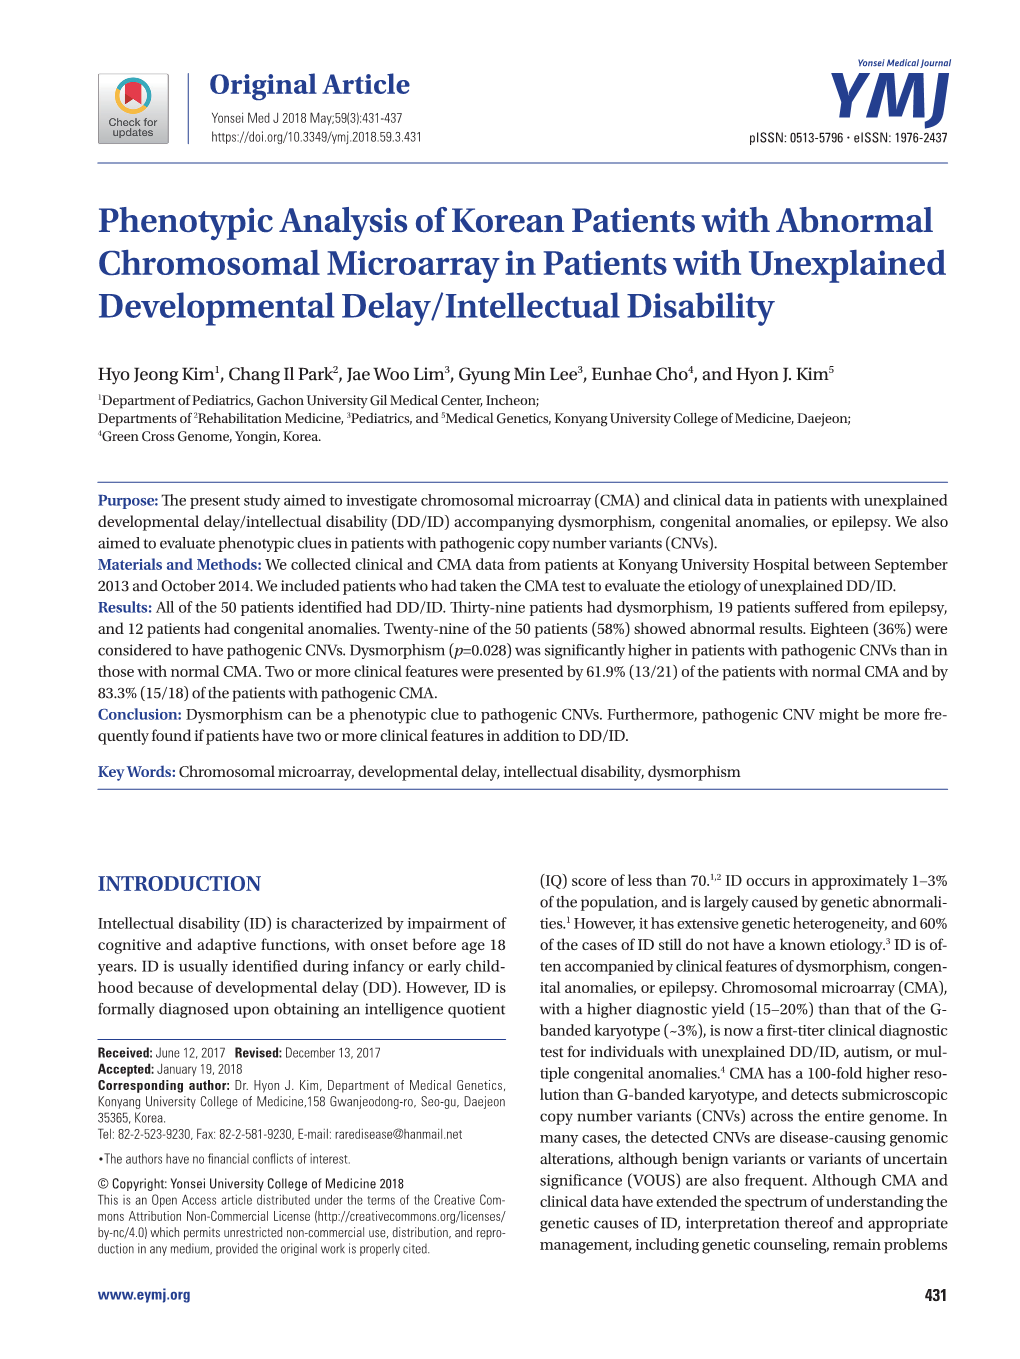 Phenotypic Analysis of Korean Patients with Abnormal Chromosomal Microarray in Patients with Unexplained Developmental Delay/Intellectual Disability